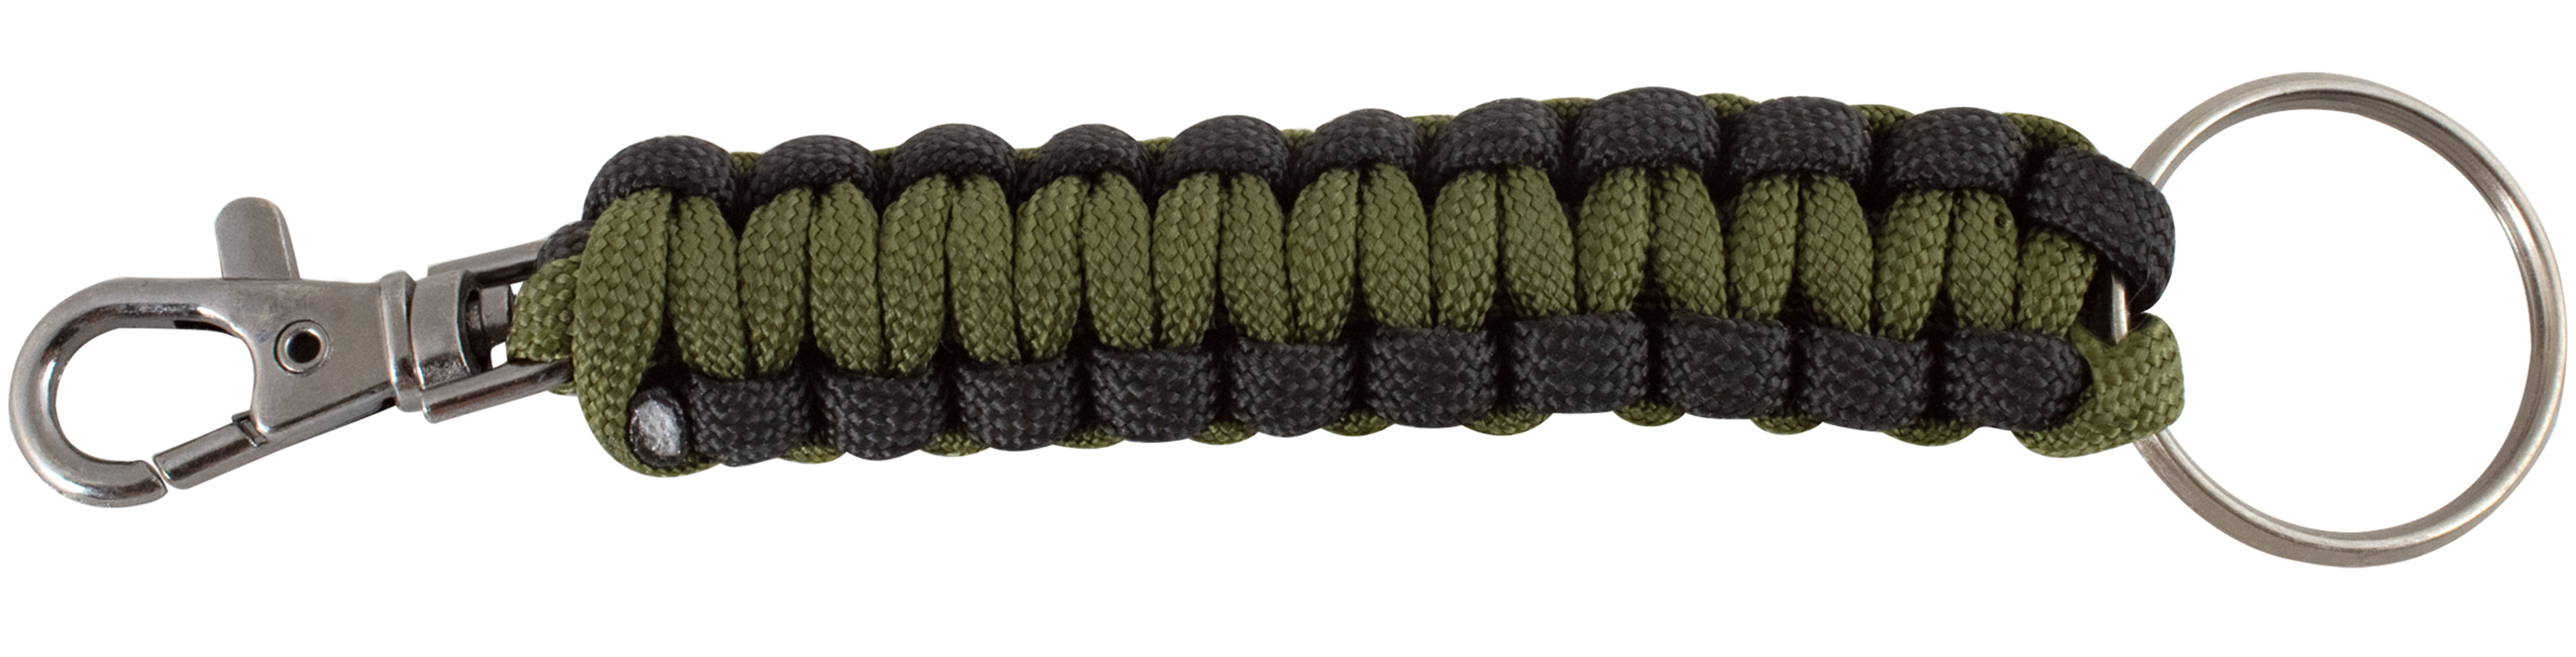 ATC Paracord Keychain by Chubby Chico Charms - Appalachian Trail Conservancy